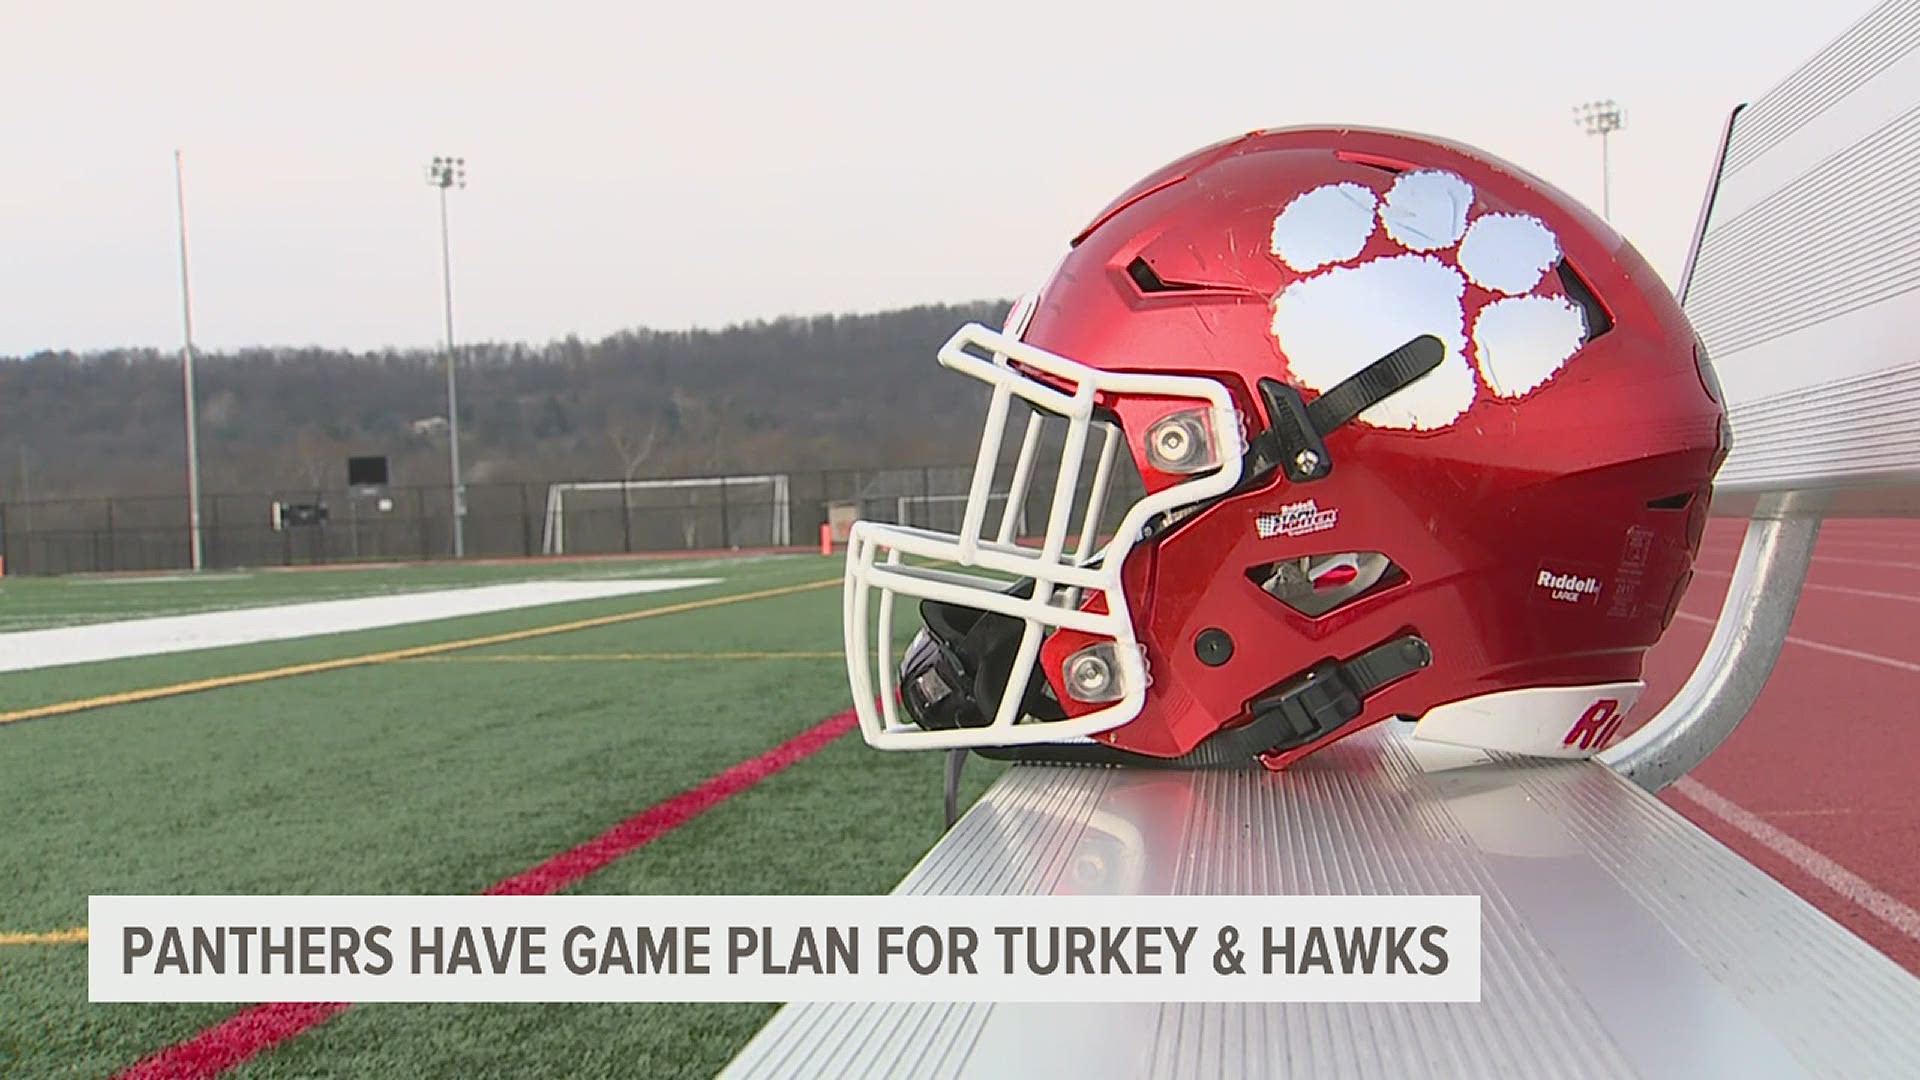 Before talking about the game plan for the Hawks on Saturday, we asked the Panthers about their game plan for turkey day.